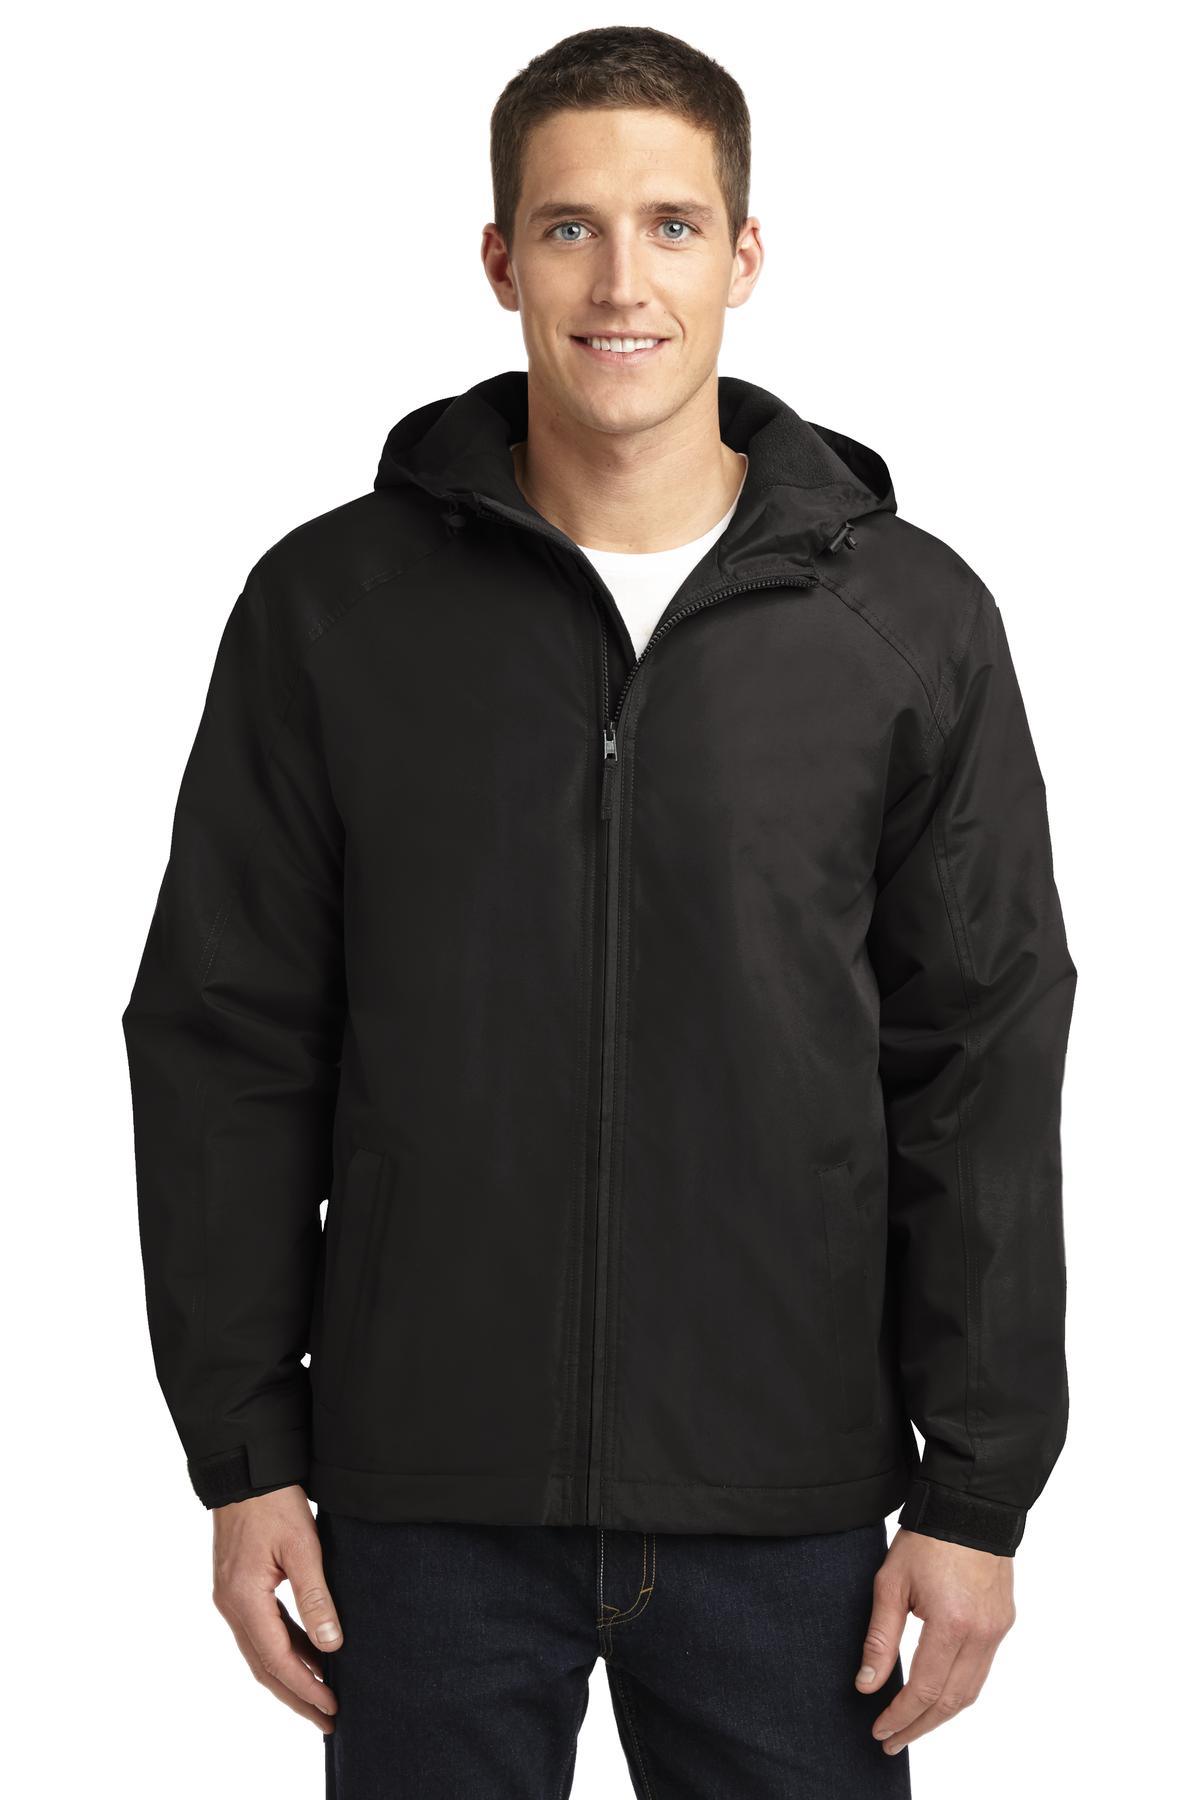 Port Authority Hooded Charger Jacket. J327 - Dresses Max